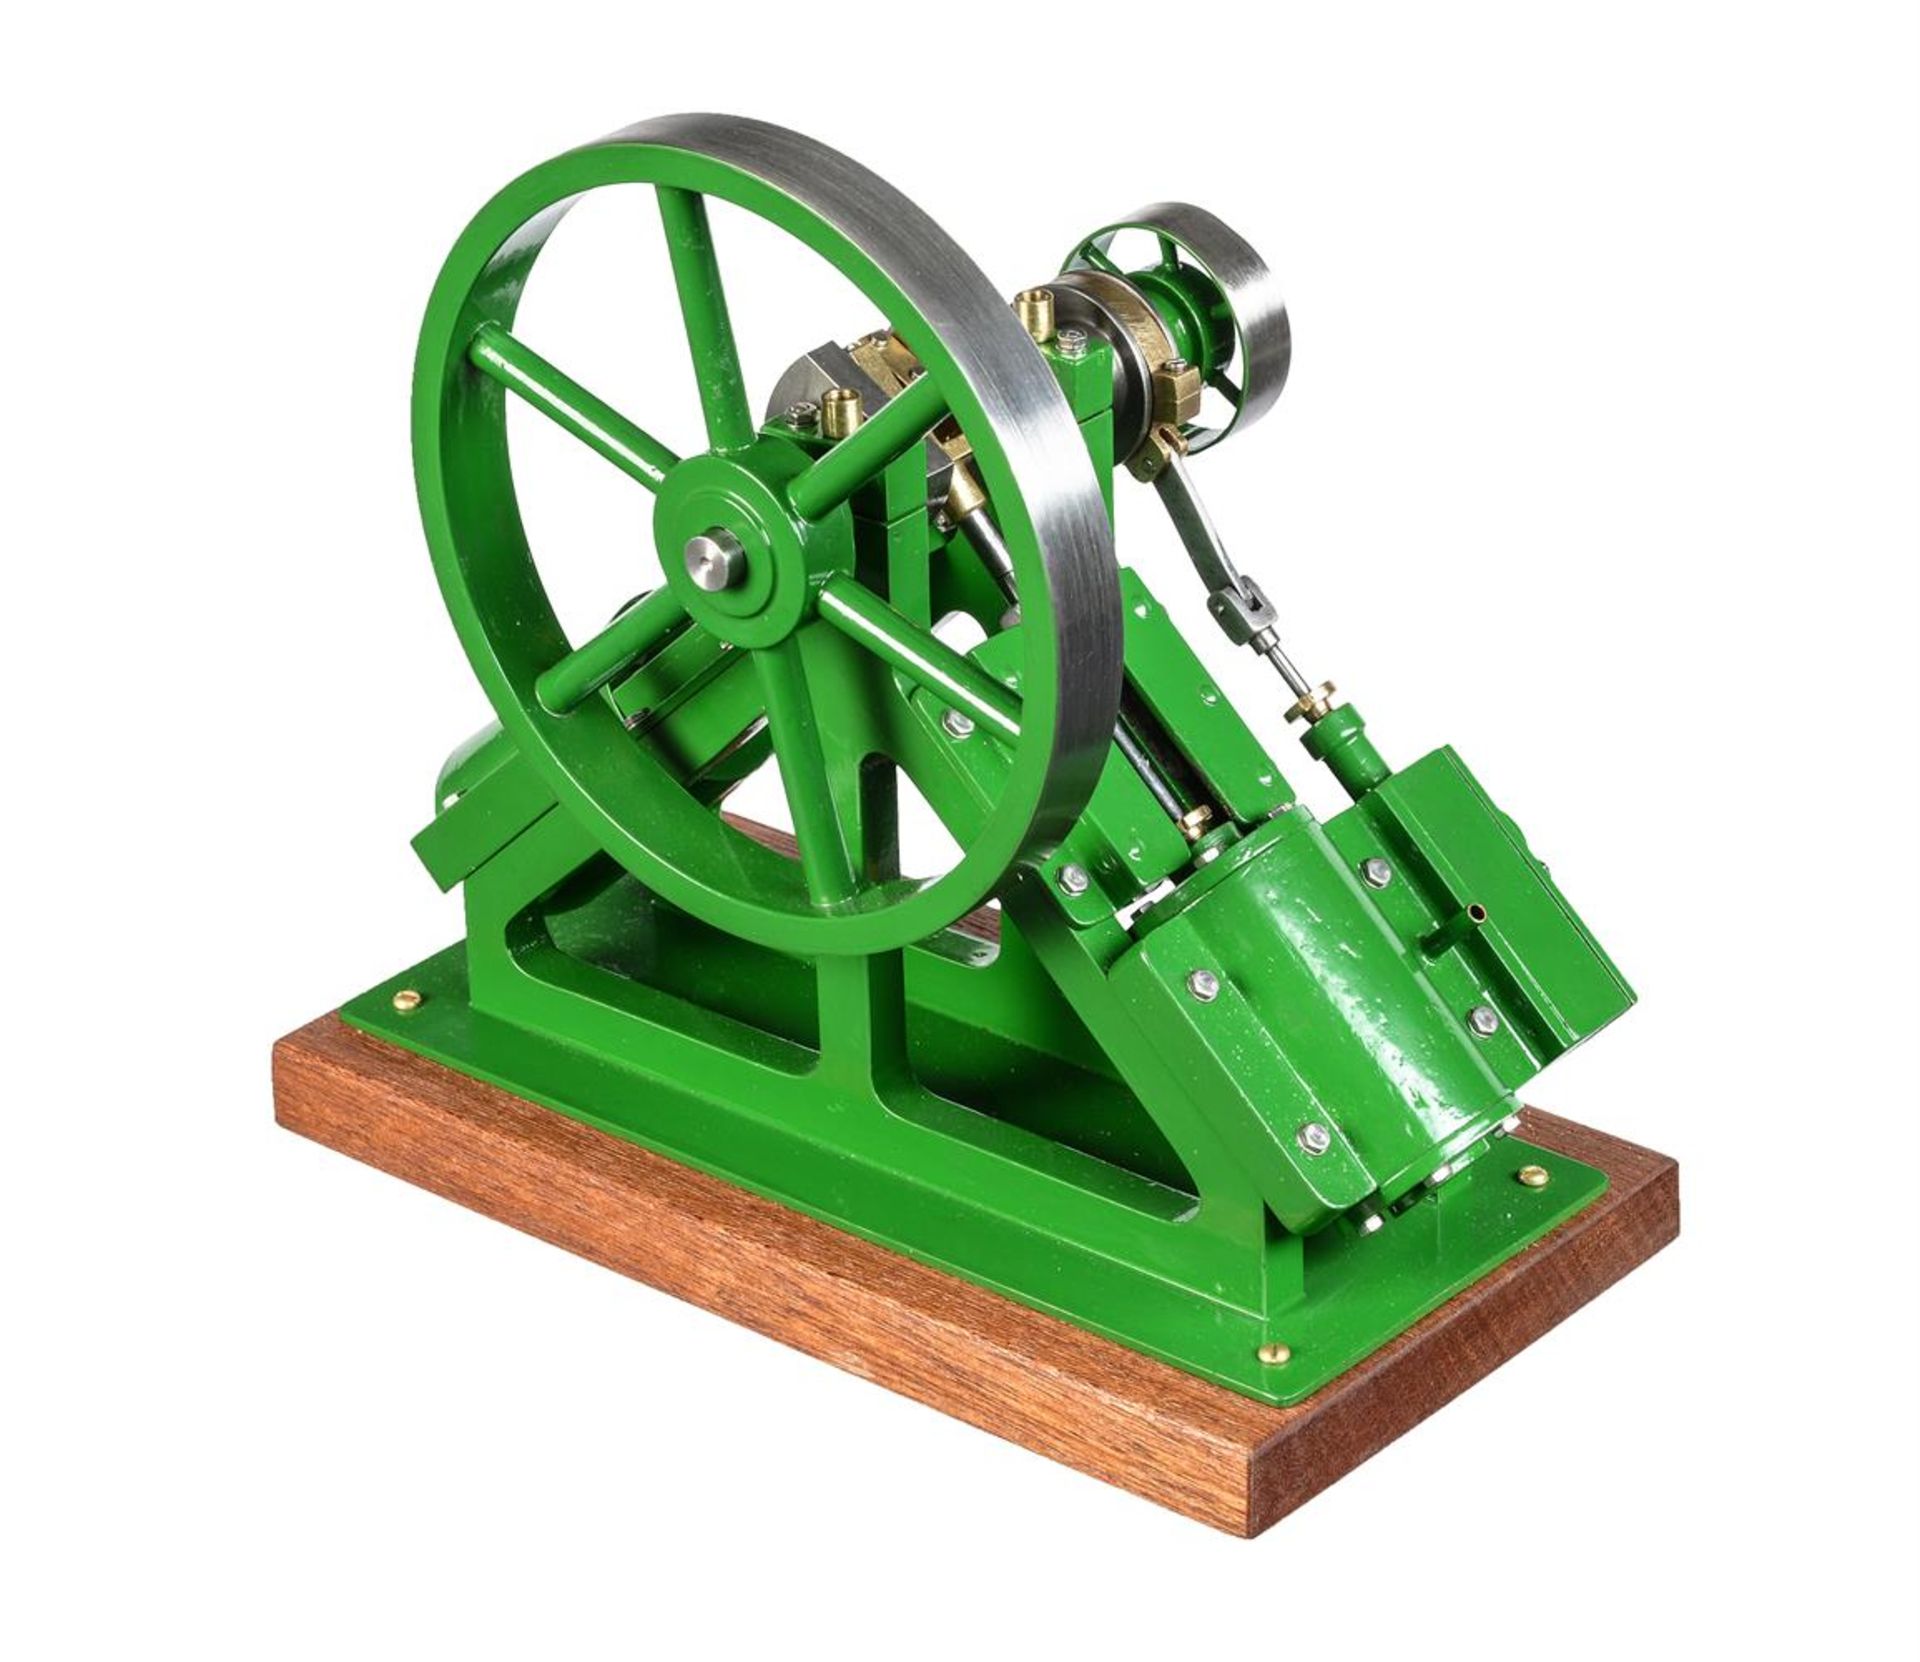 A well-engineered model of a twin diagonal live steam marine engine